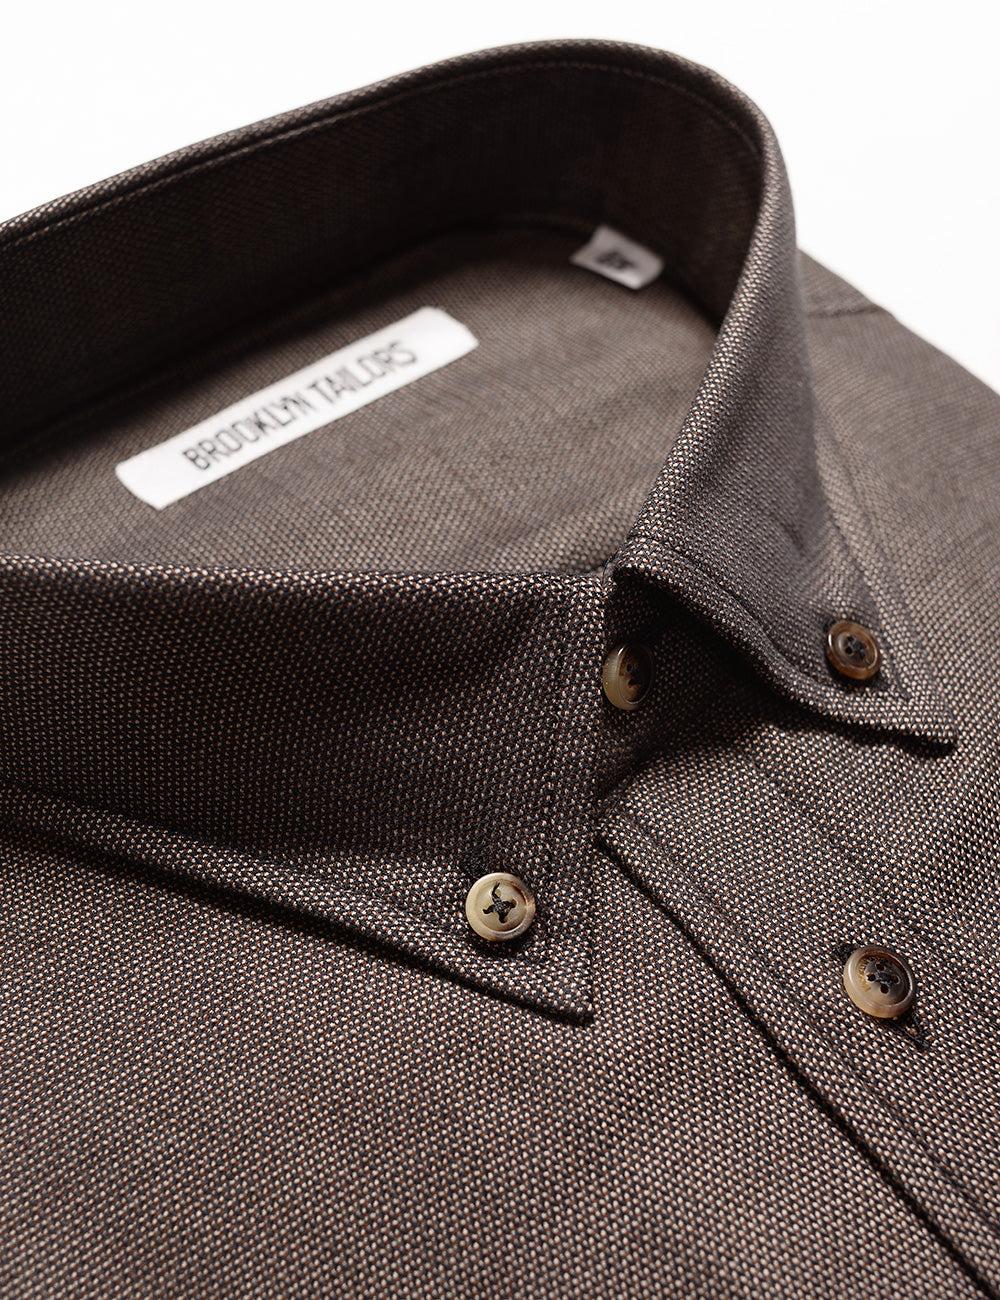 Detail of Brooklyn Tailors BKT10 Slim Casual Shirt in Soft Basketweave - Earth showing collar, buttons, and fabric texture